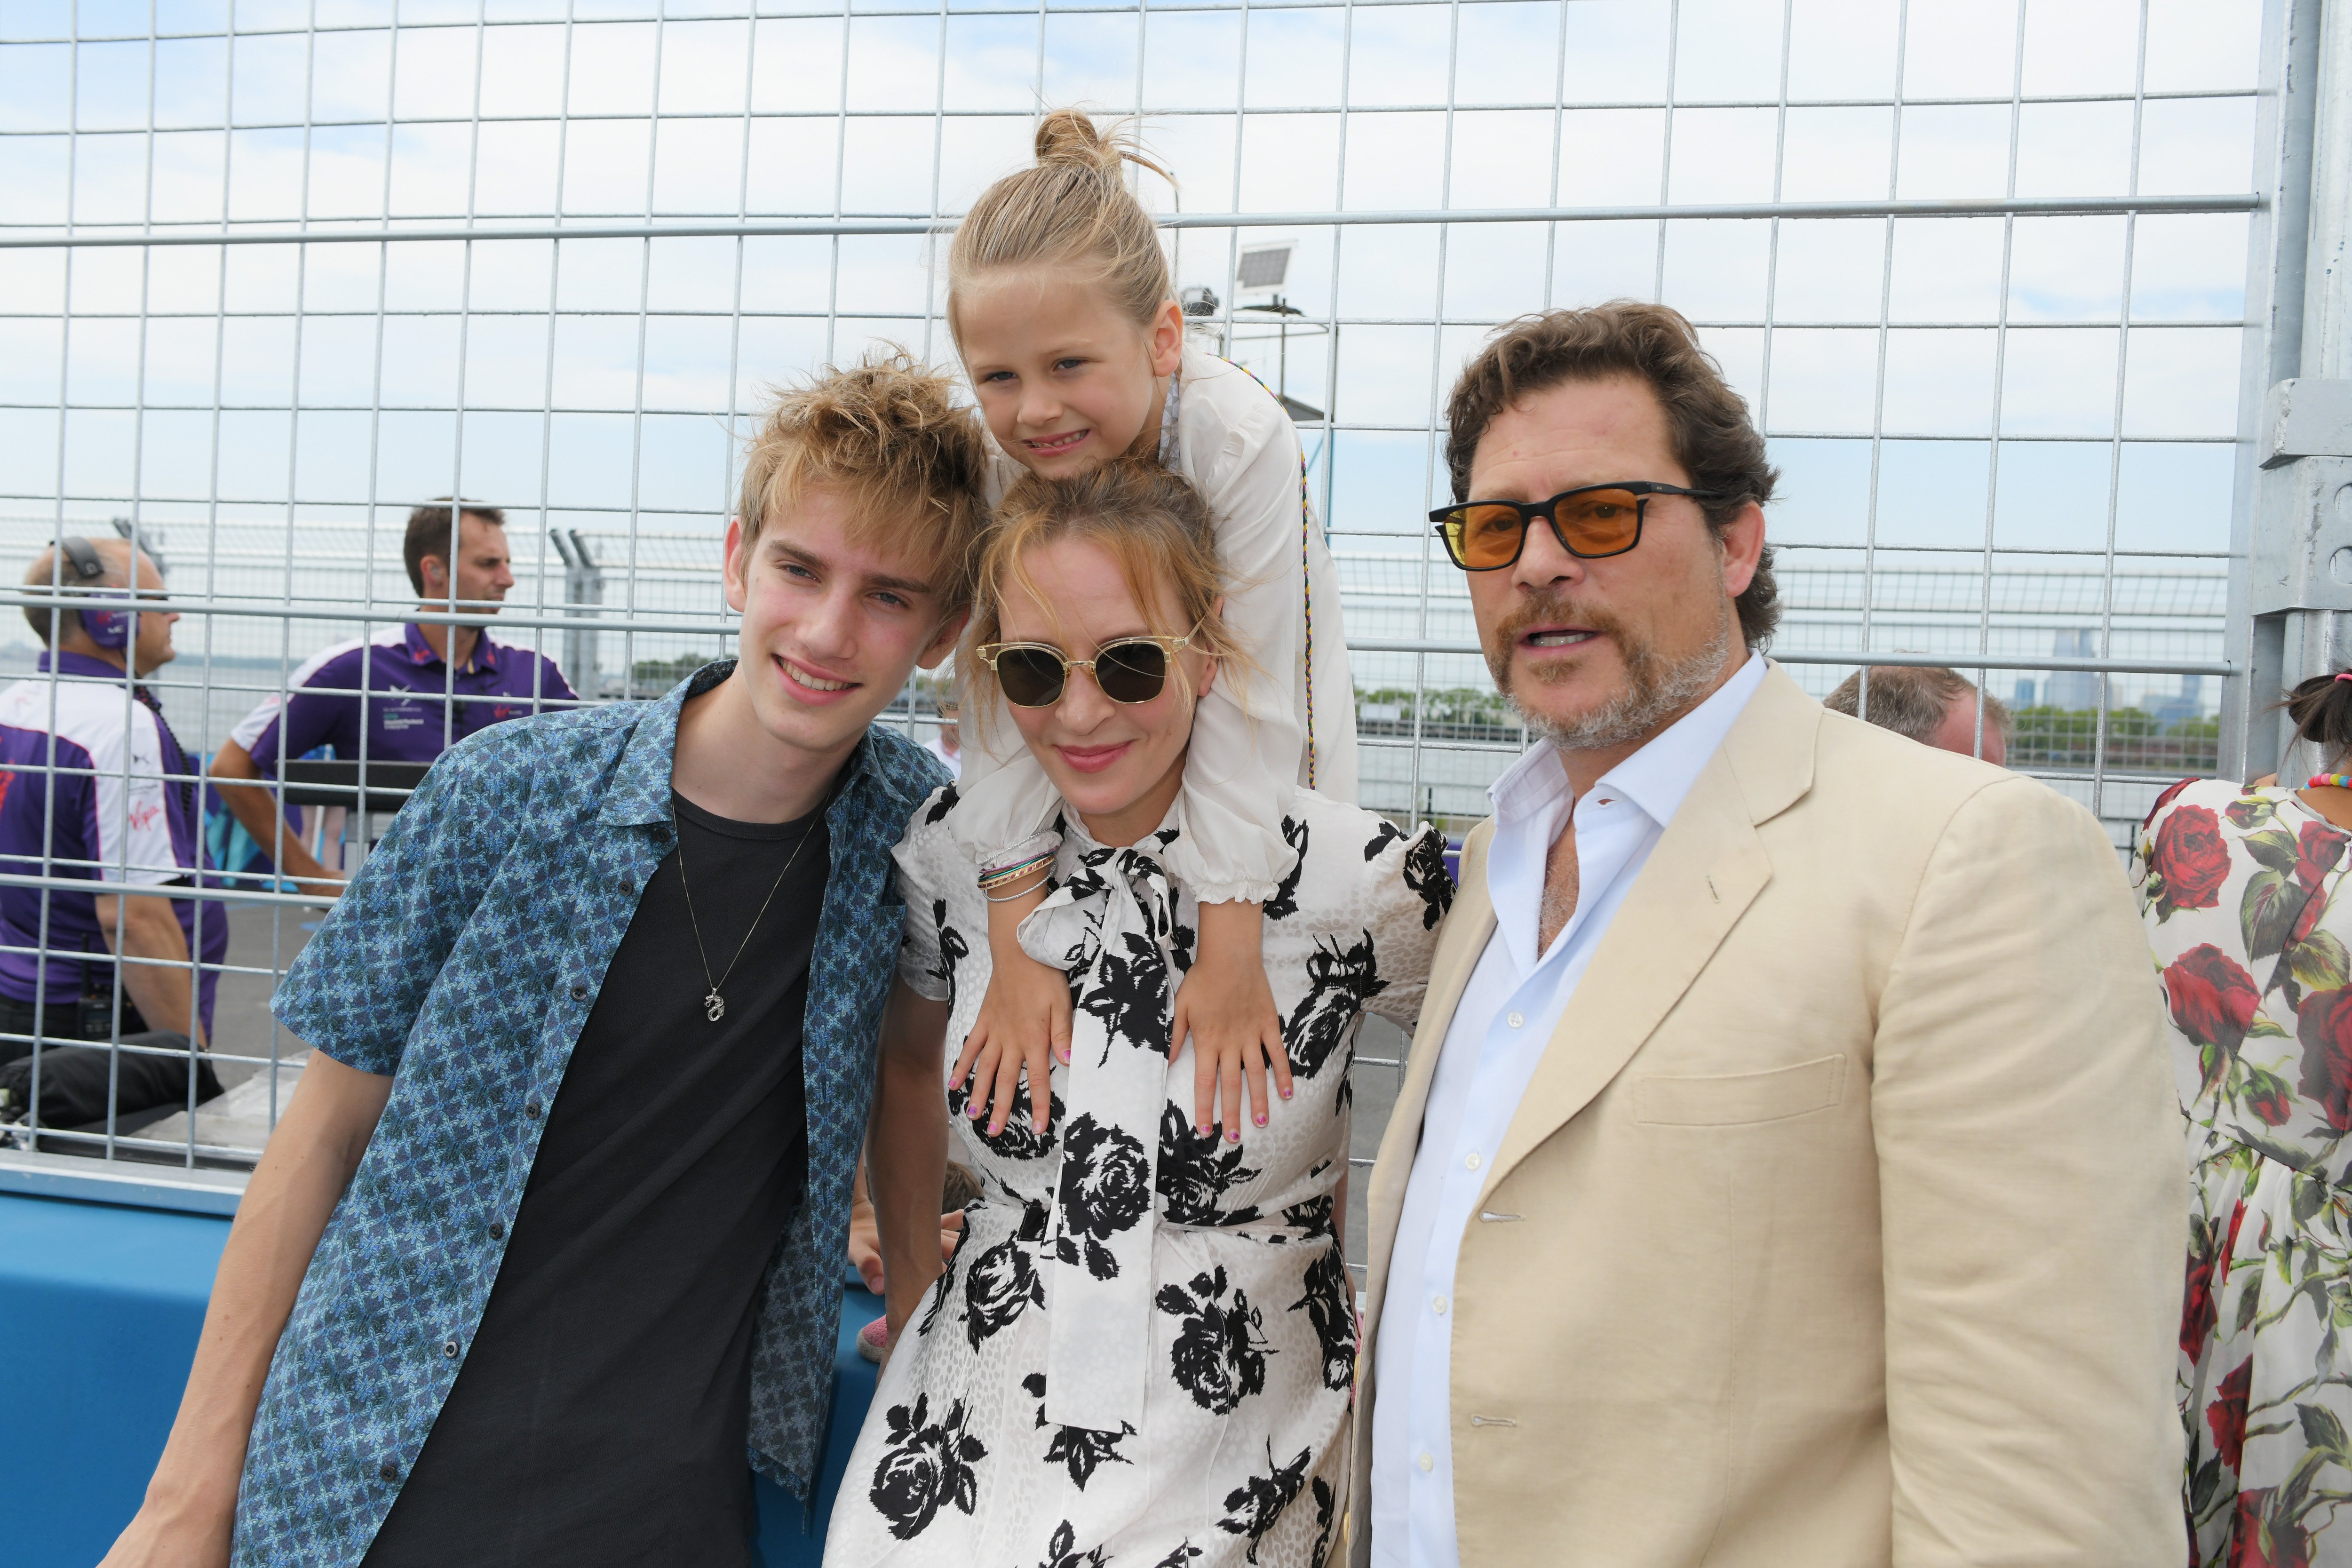  Levon Thurman-Hawke, Uma Thurman, Luna Thurman-Busson and Arpad Busson in New York City at the Formula E 2018 Qatar Airways New York City E-Prix on July 15, 2018. | Photo: Getty Images